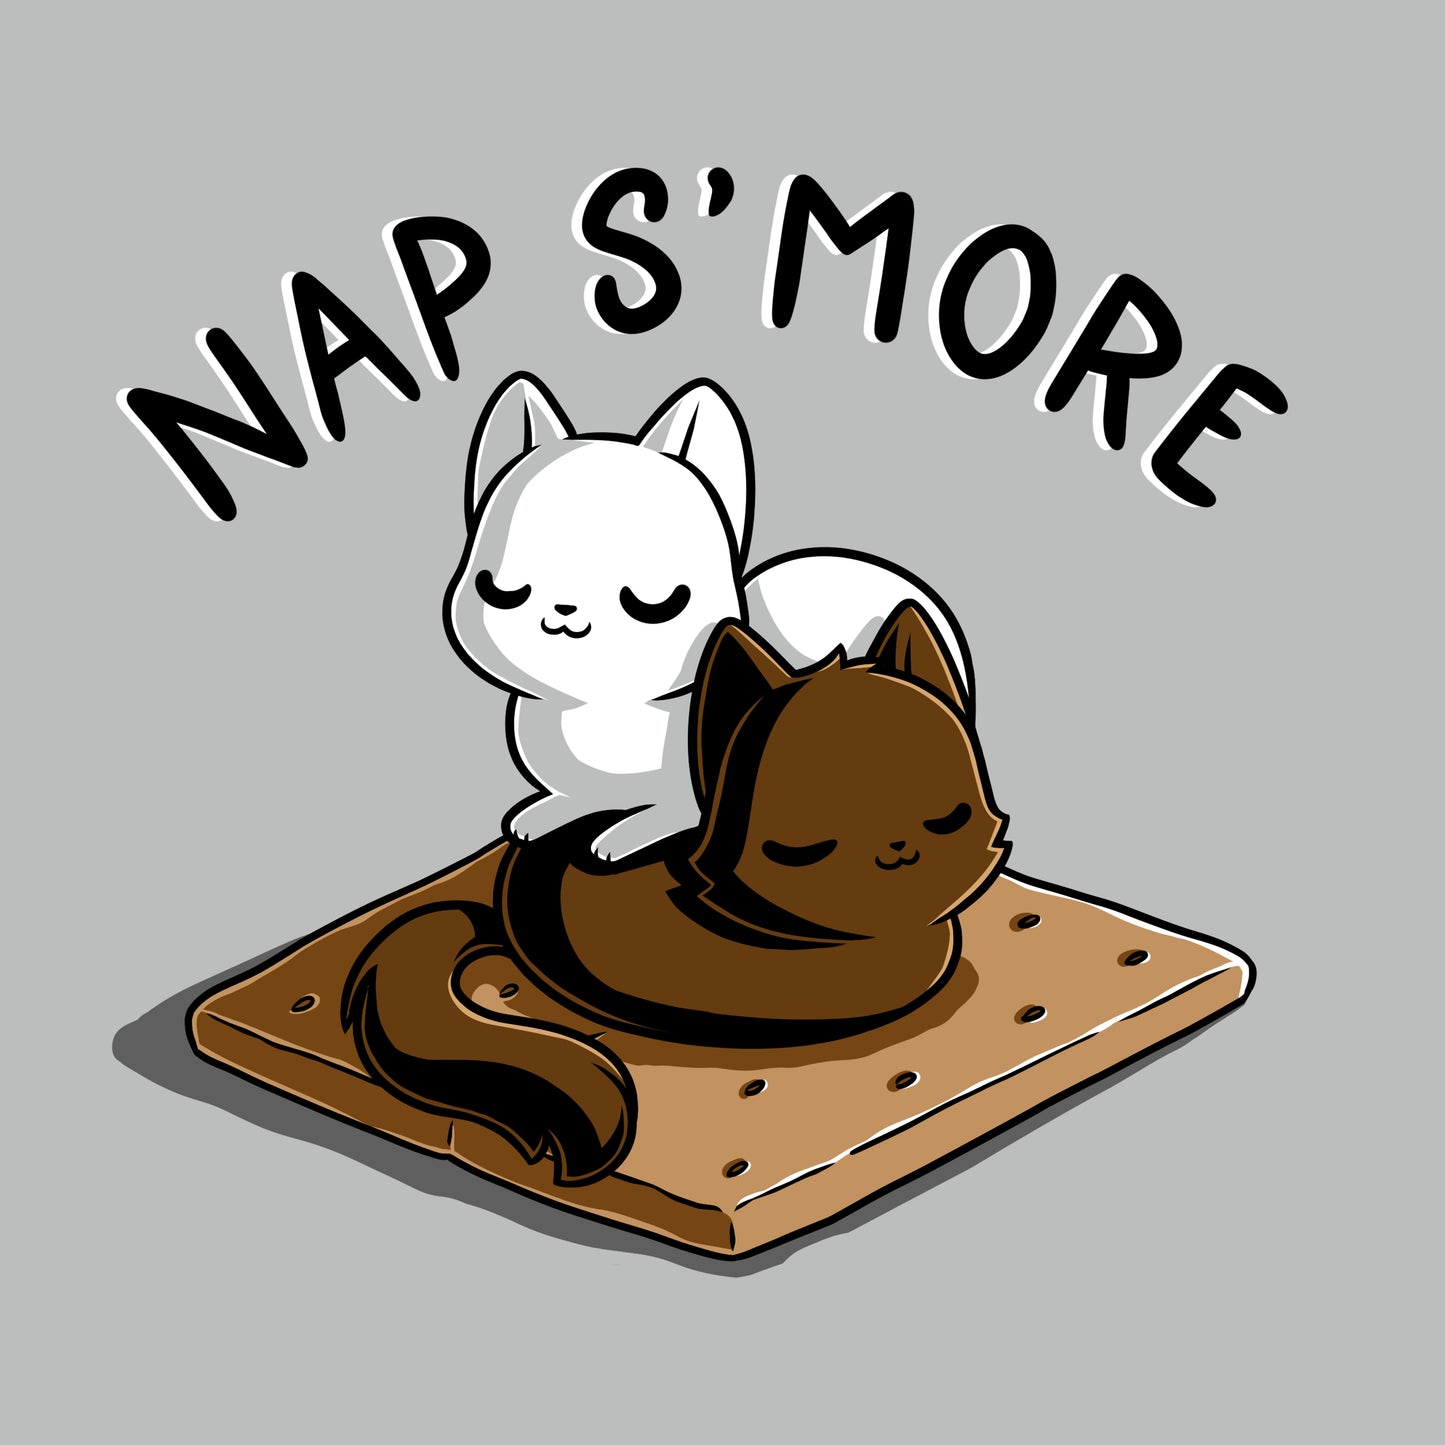 Two cats, one white and one brown, are peacefully sleeping on a graham cracker. Text above them reads "NAP S'MORE." Enjoy the cozy scene with monsterdigital's Nap S'more featuring these adorable kitty cuddles.